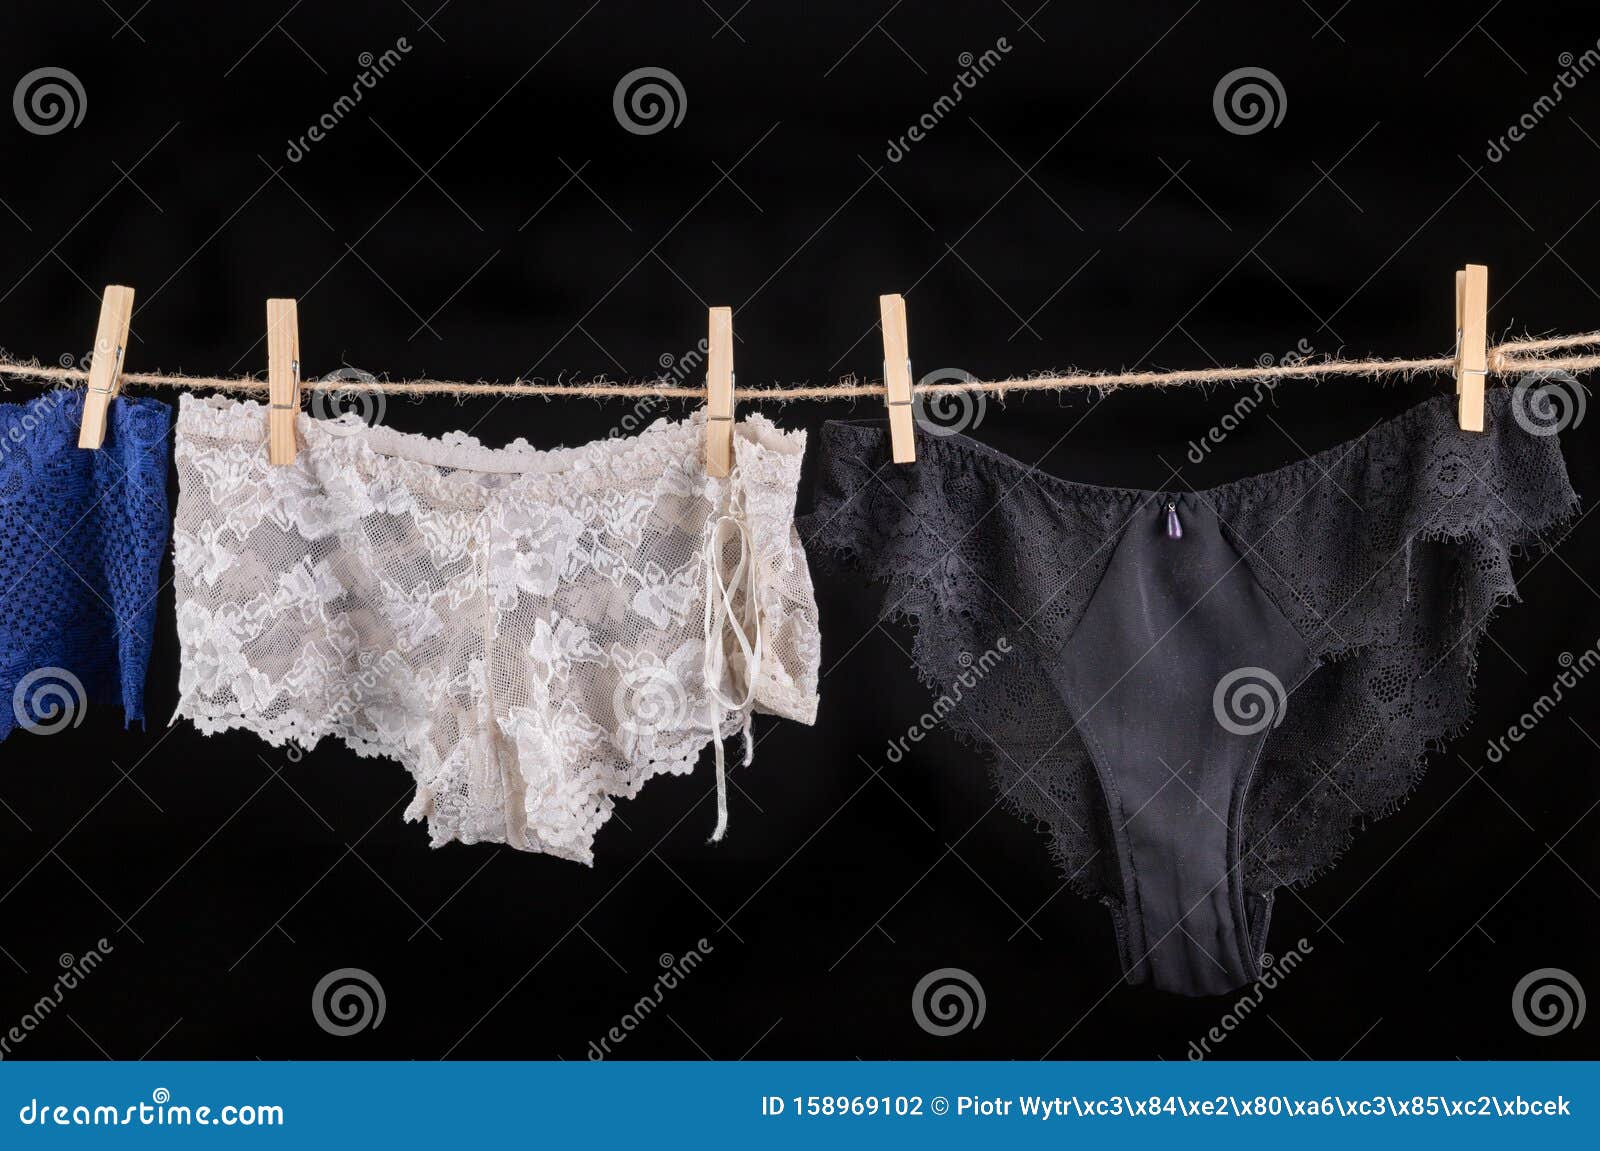 159 Teenage Girls Underwear Stock Photos - Free & Royalty-Free Stock Photos  from Dreamstime